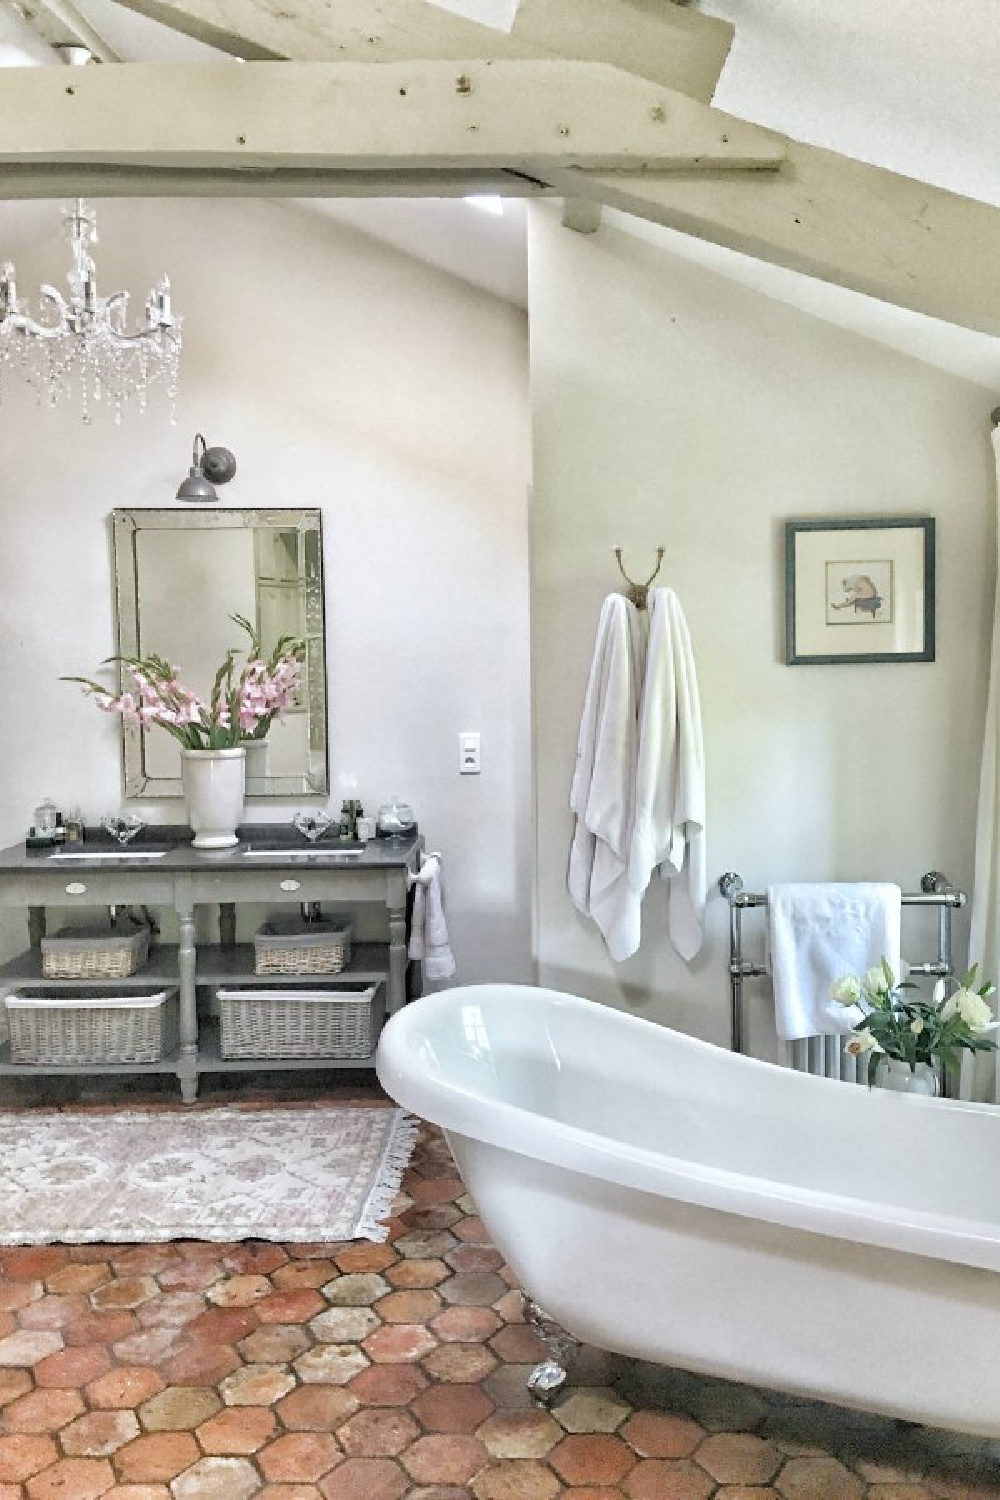 Quiet and timeless hues in a French farmhouse bathroom by Vivi et Margot features reclaimed terracotta hex tiles, freestanding tub, romantic chandelier, and Farrow and Ball's Strong White on the walls.